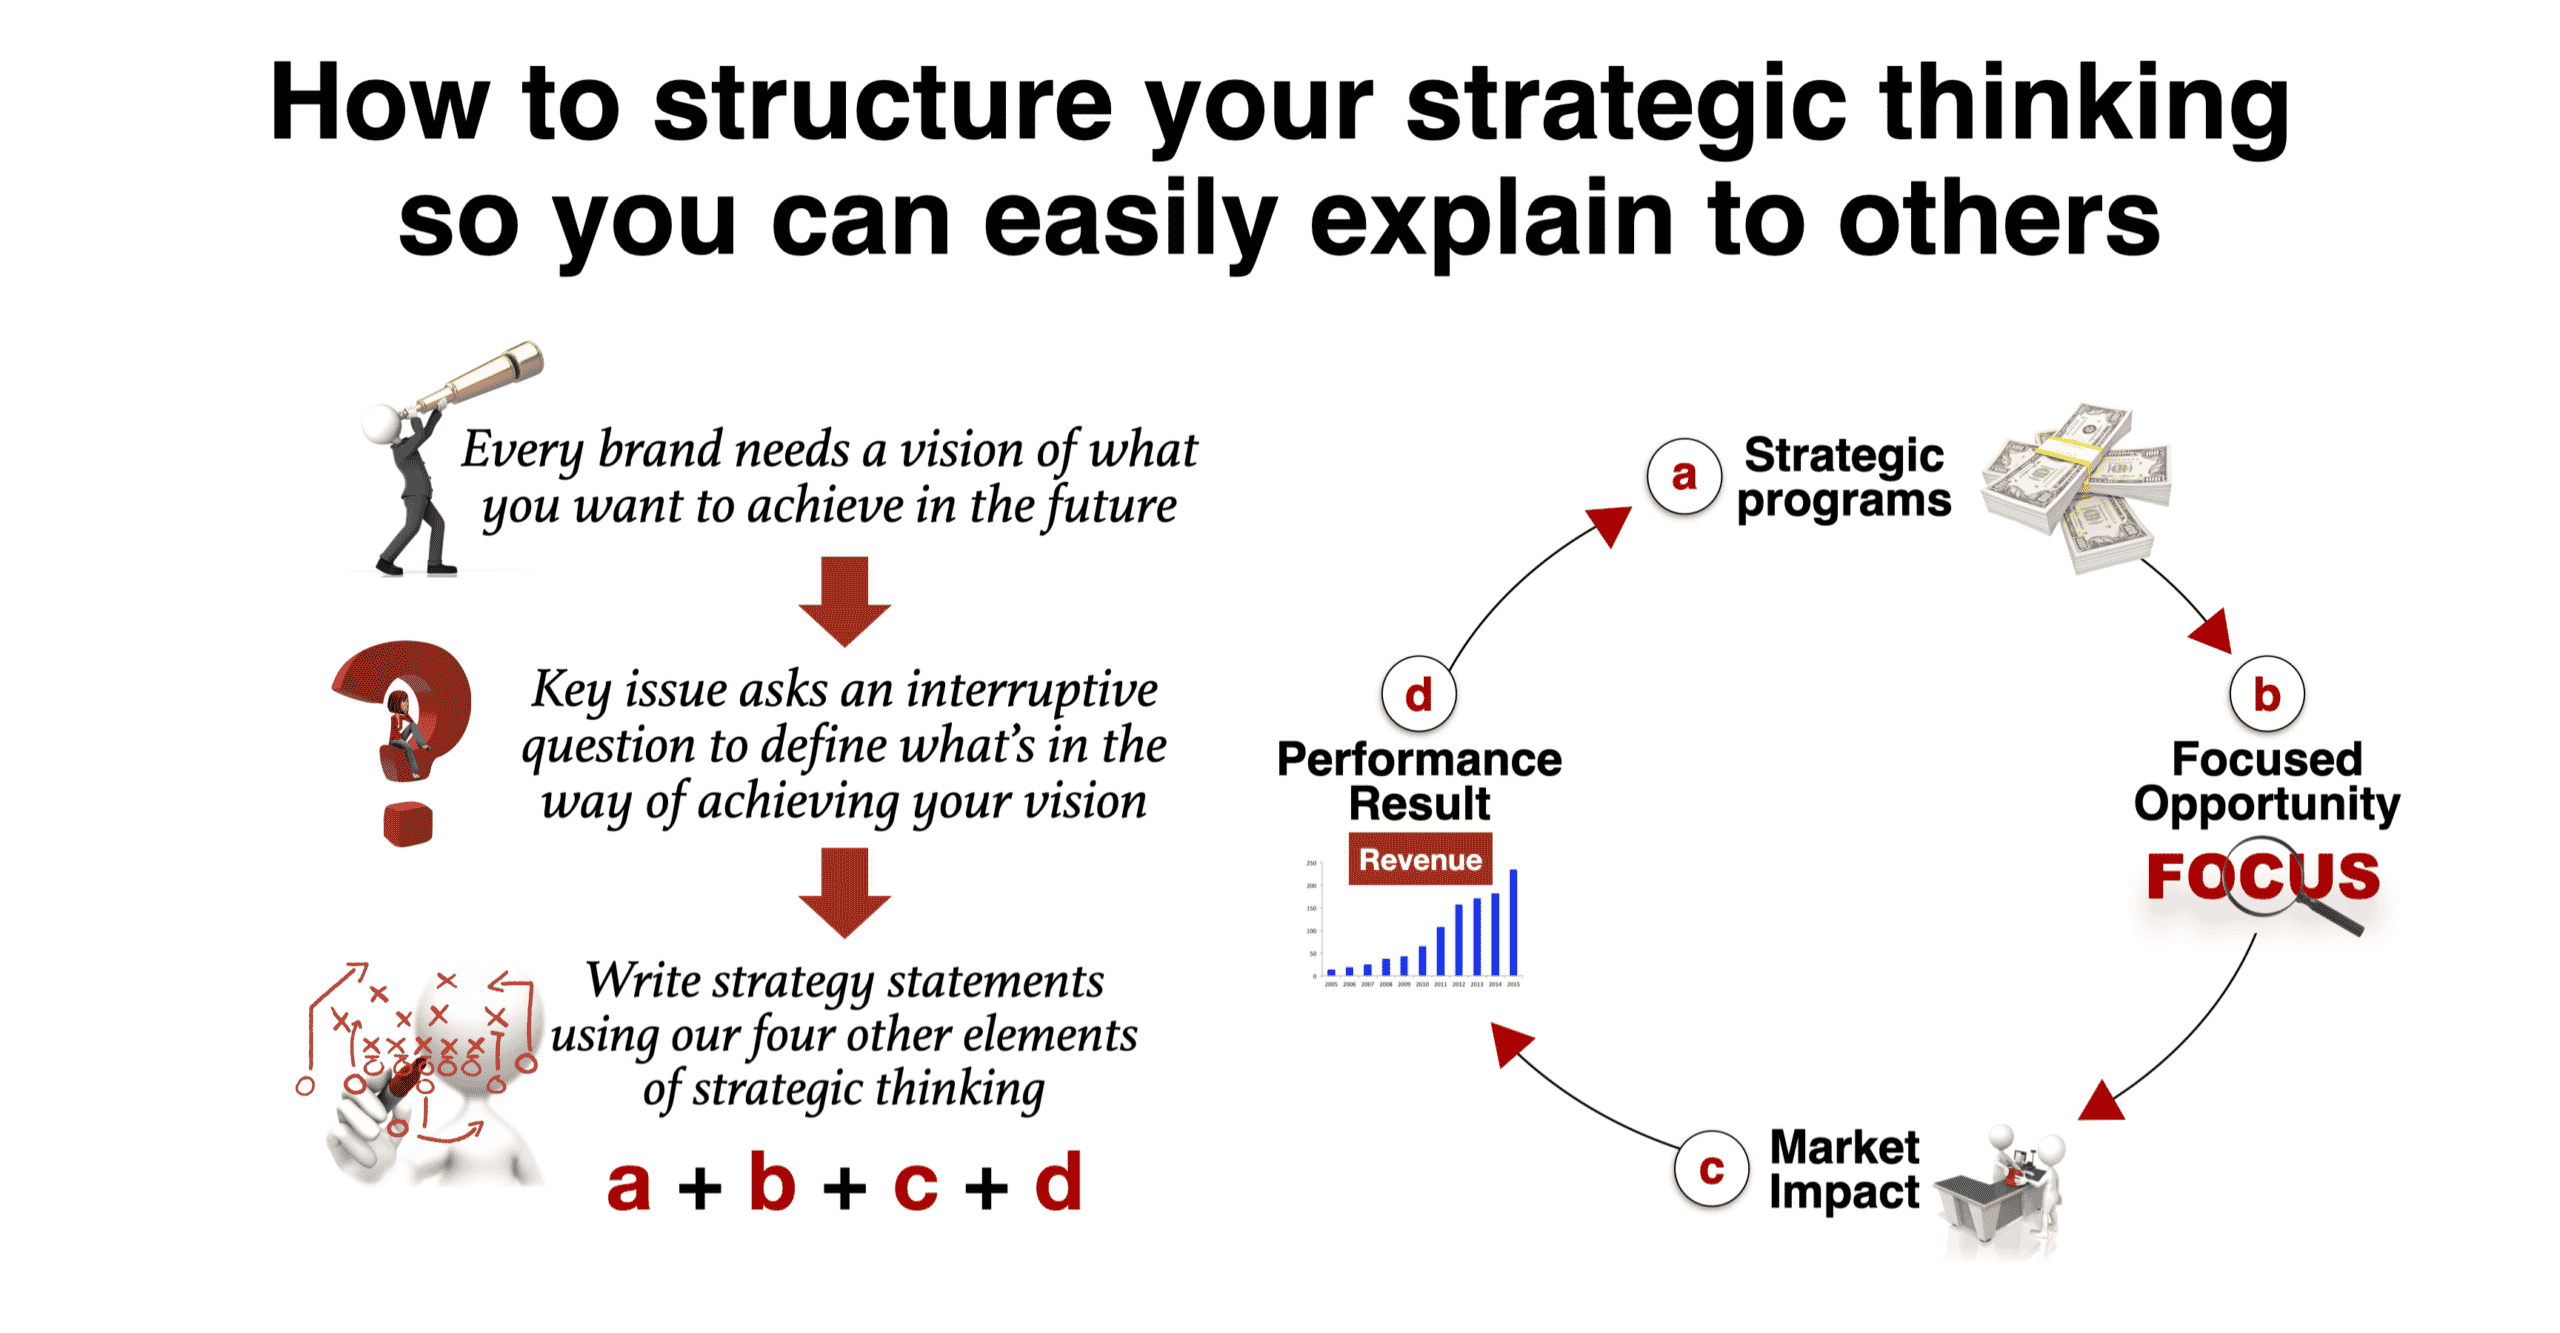 Structuring your strategic thinking